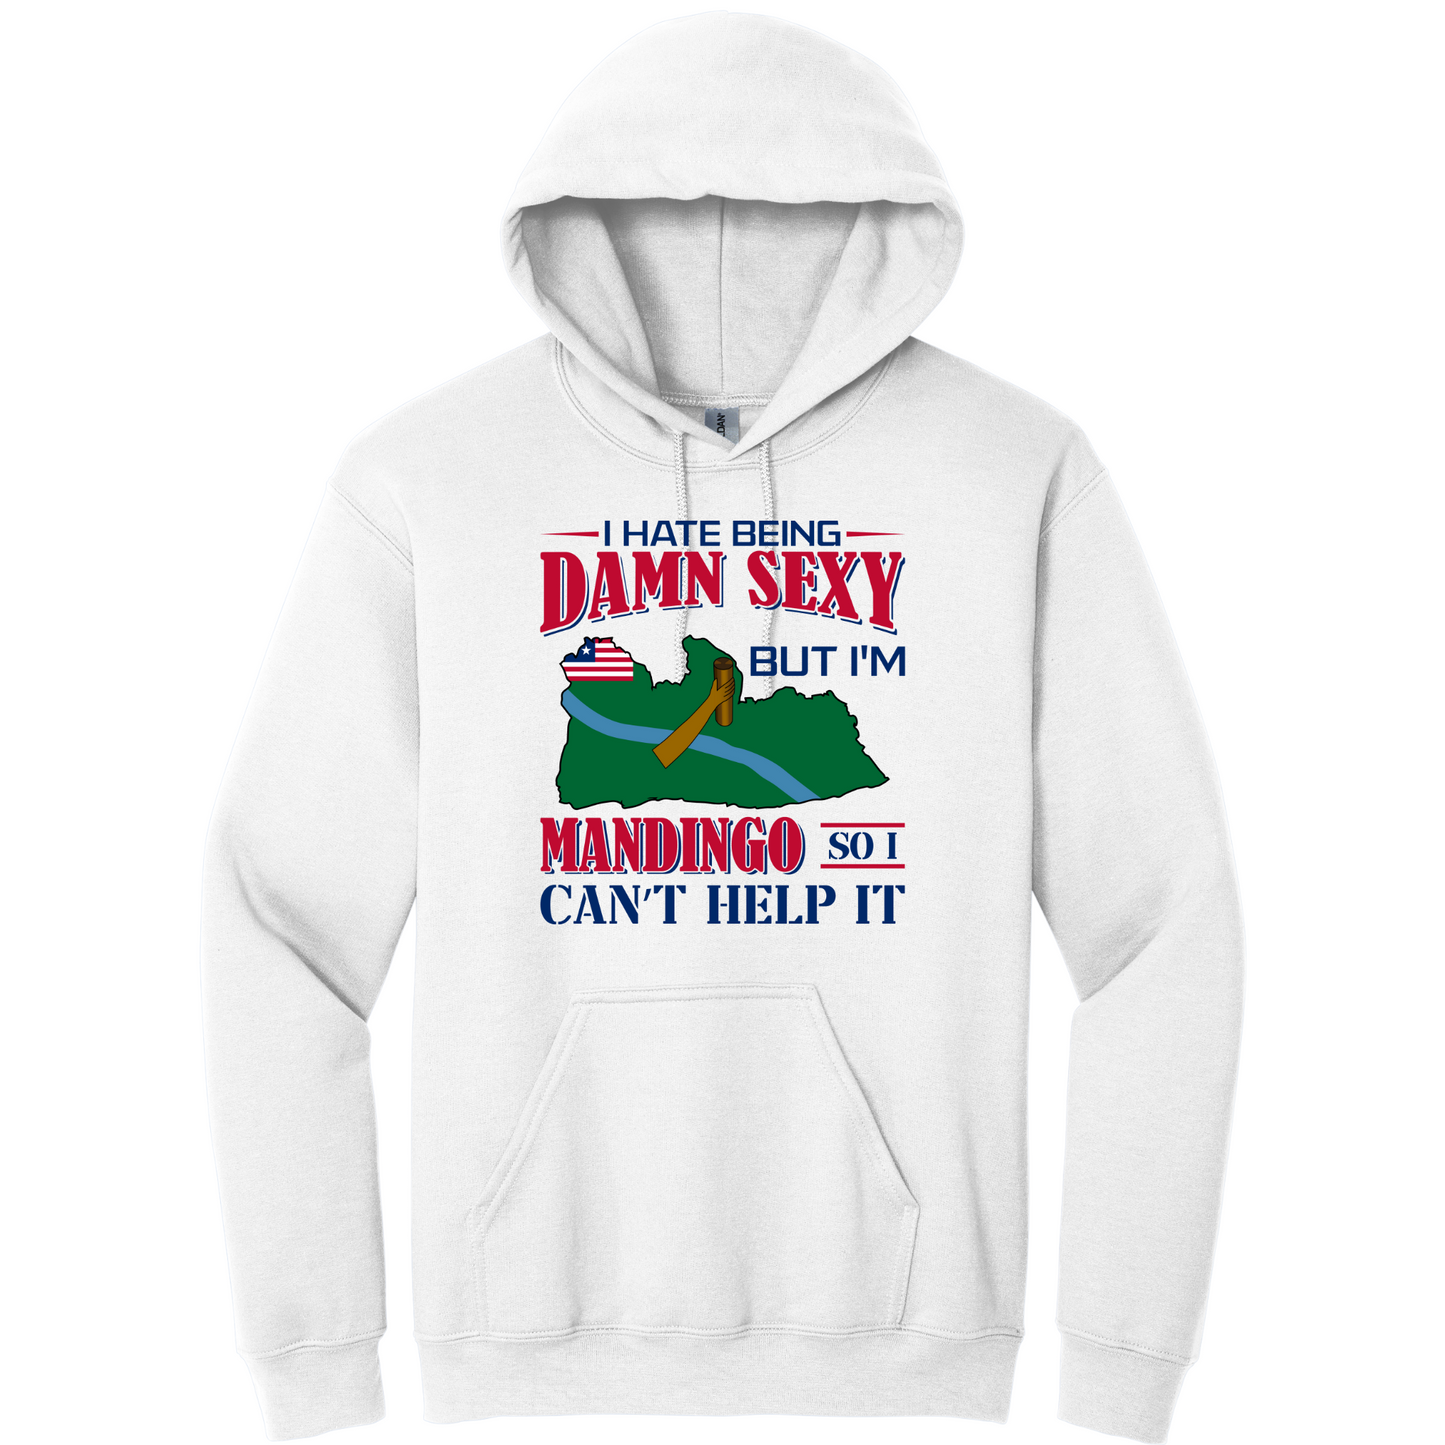 I Hate Being Damn Sexy But I'm -White Hoodie